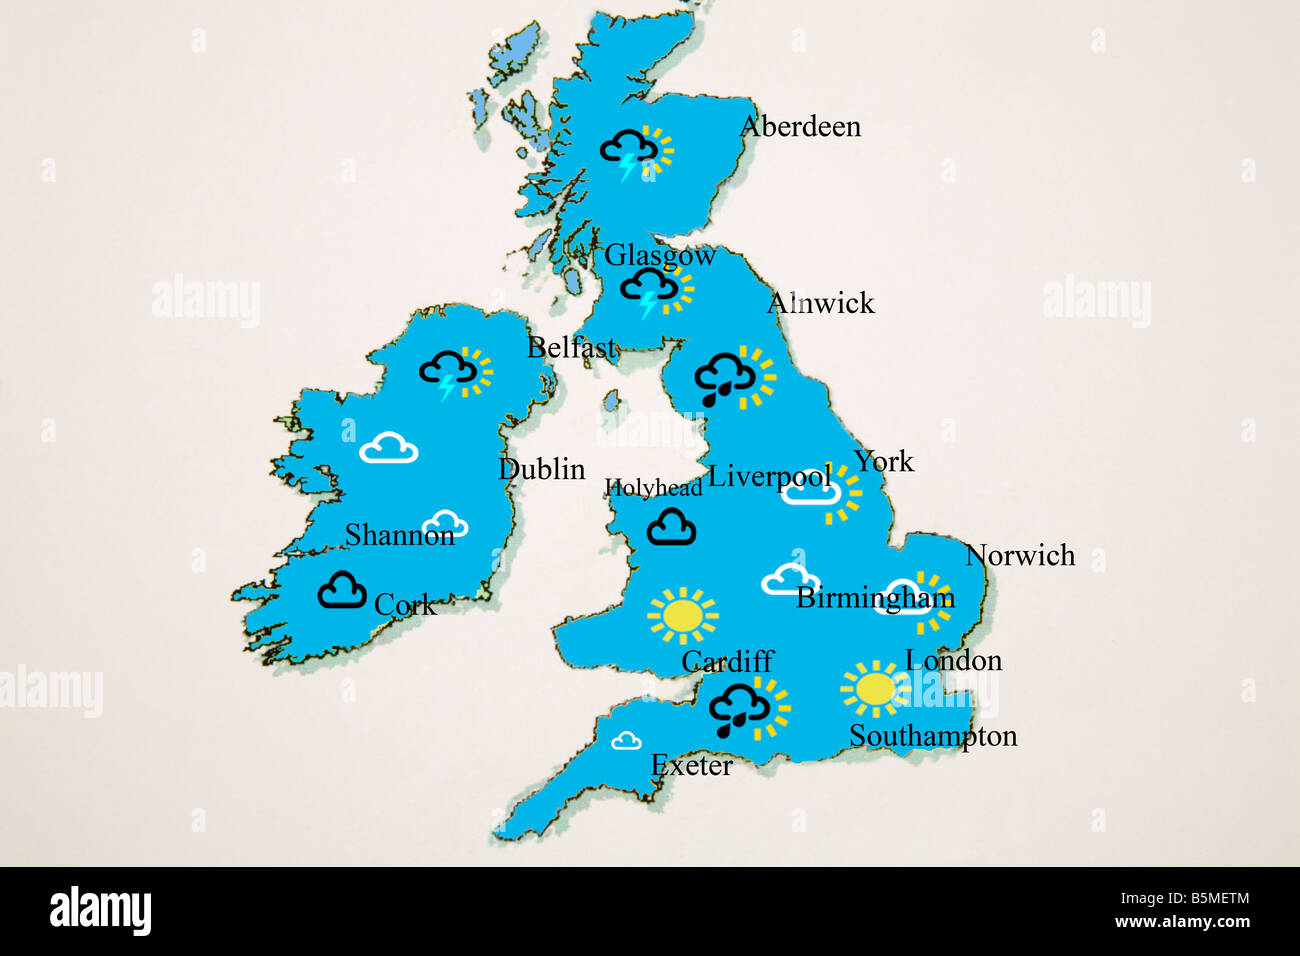 Studio UK weather map showing rain sun cloud and thunder storms in different areas Stock Photo